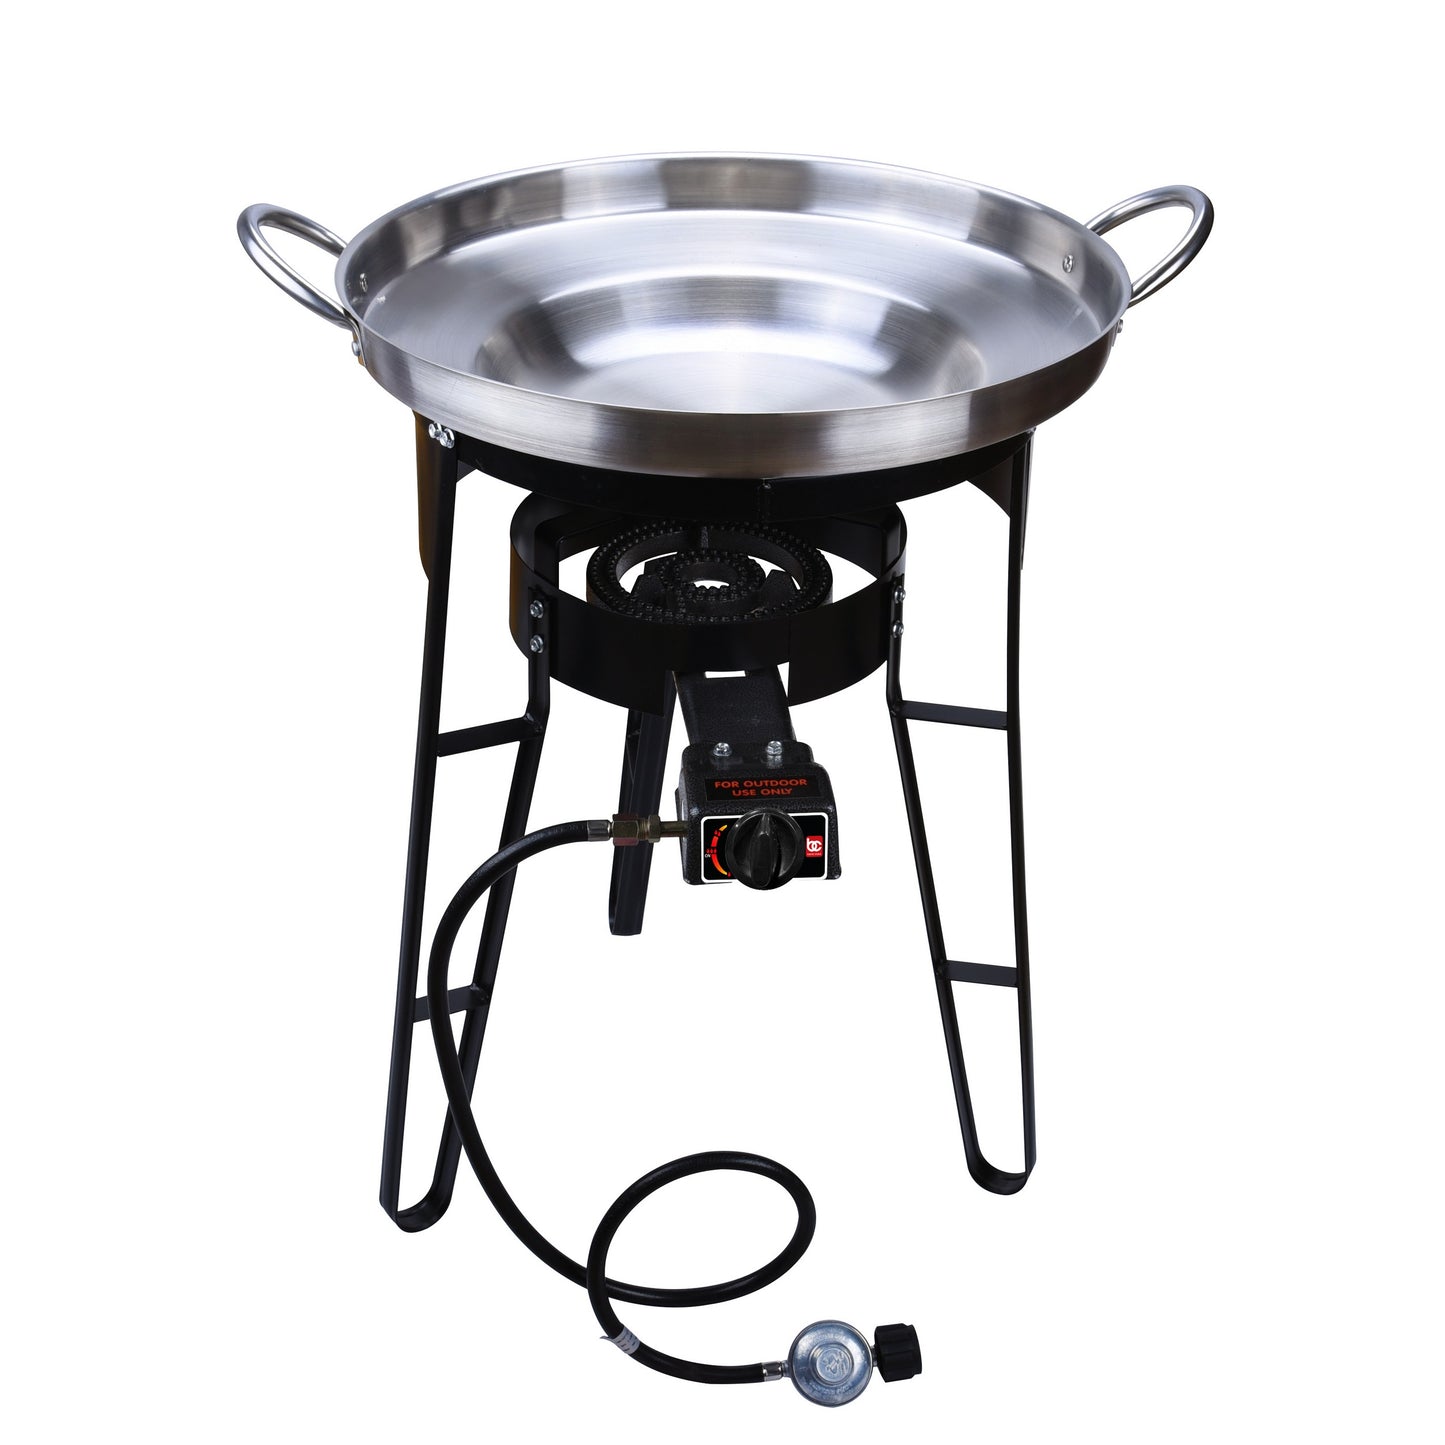 
                  
                    Bene Casa cast-iron Propane Burner with Stand & Comal Set (Party Size)
                  
                